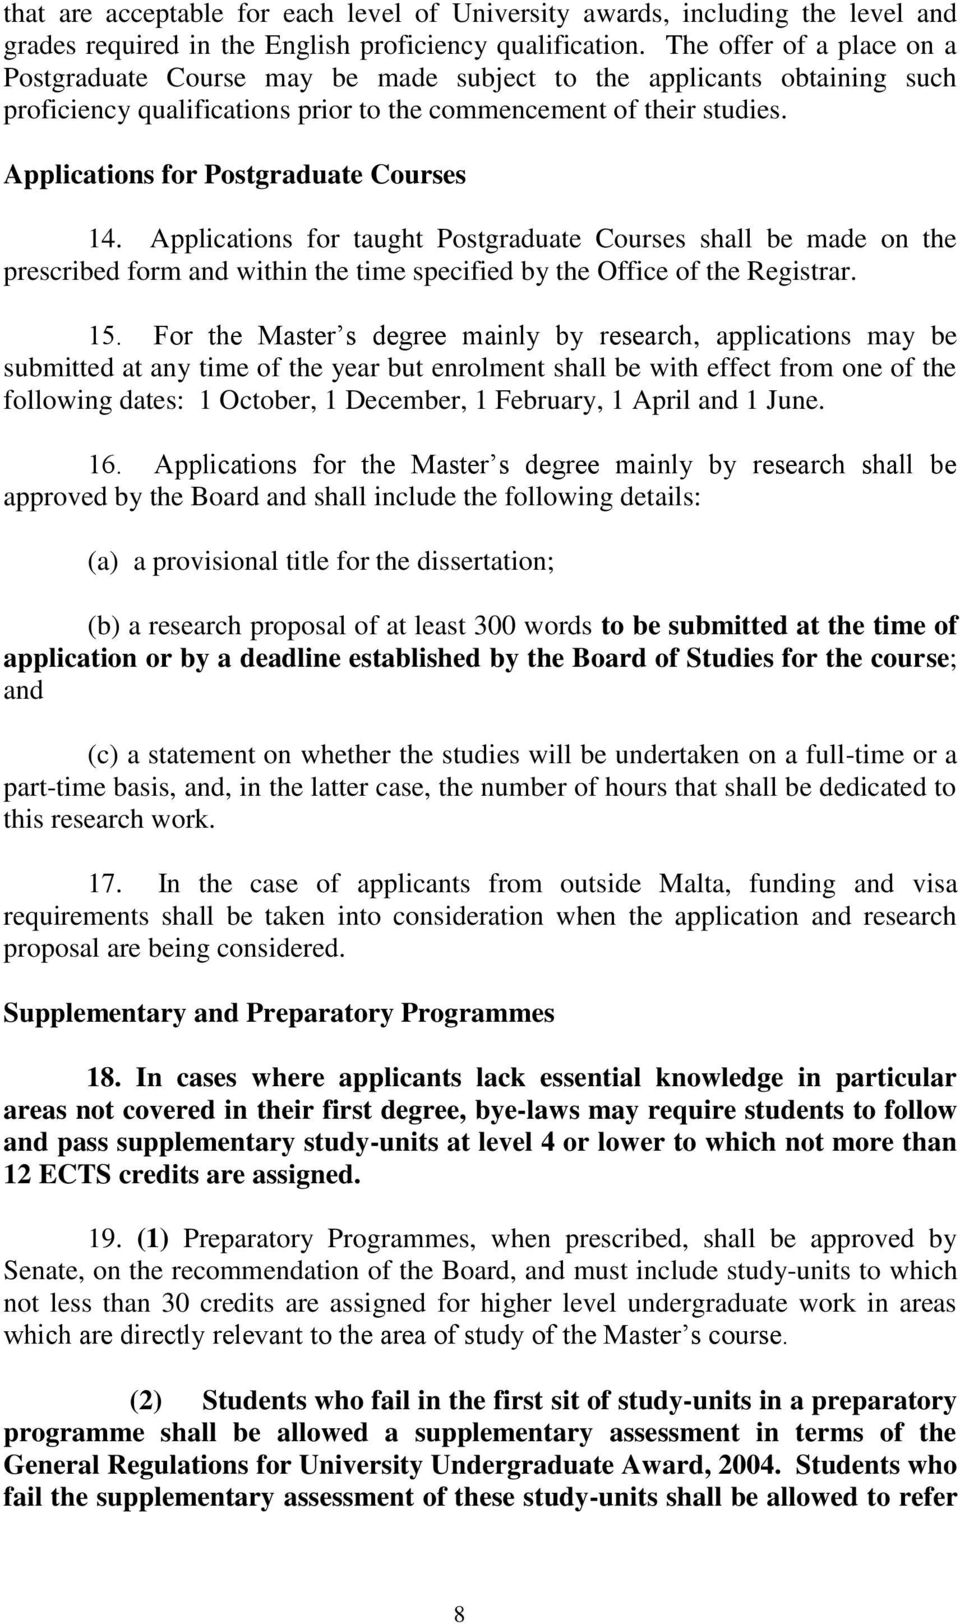 Applications for Postgraduate Courses 14. Applications for taught Postgraduate Courses shall be made on the prescribed form and within the time specified by the Office of the Registrar. 15.